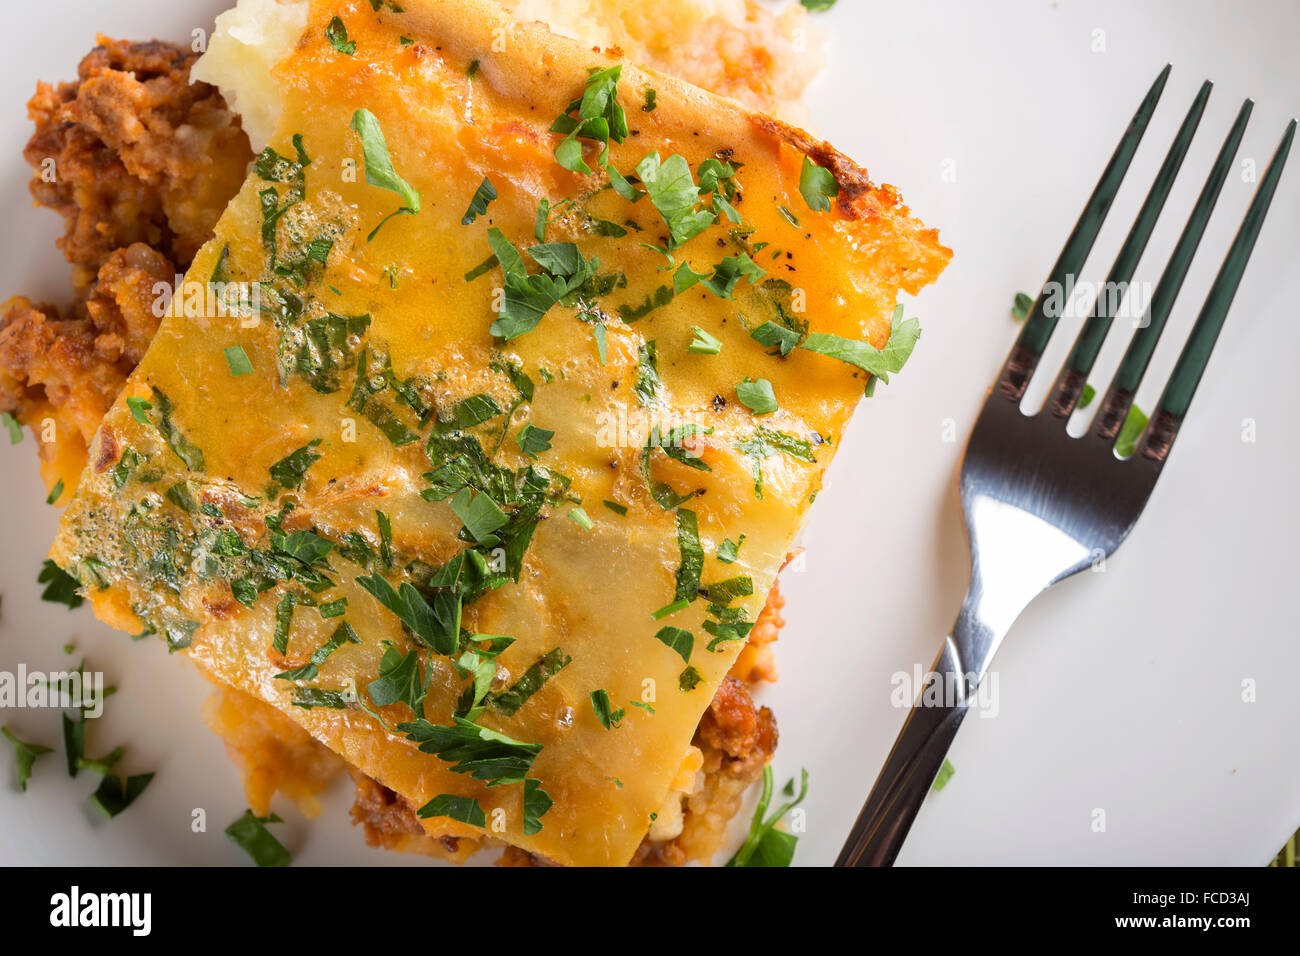 Moussaka with minced meat, potatoes and parsley on white plate Stock Photo